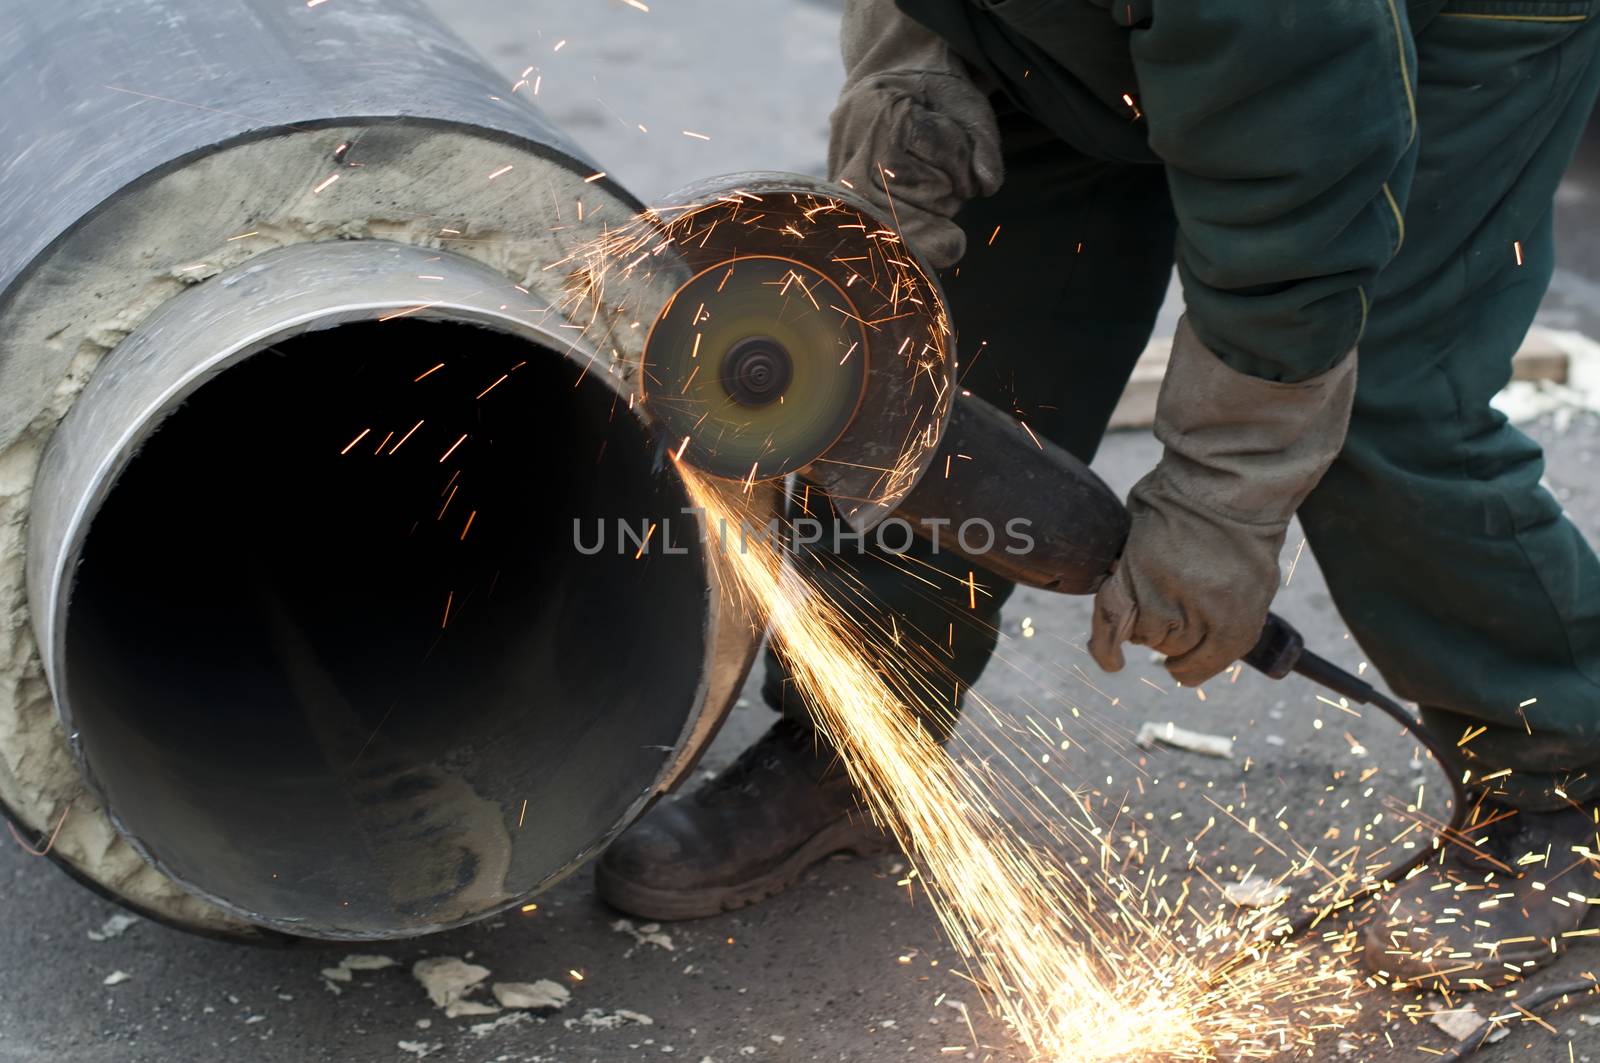 Cutting of pipes with grinder. Hot water and steam heating pipe